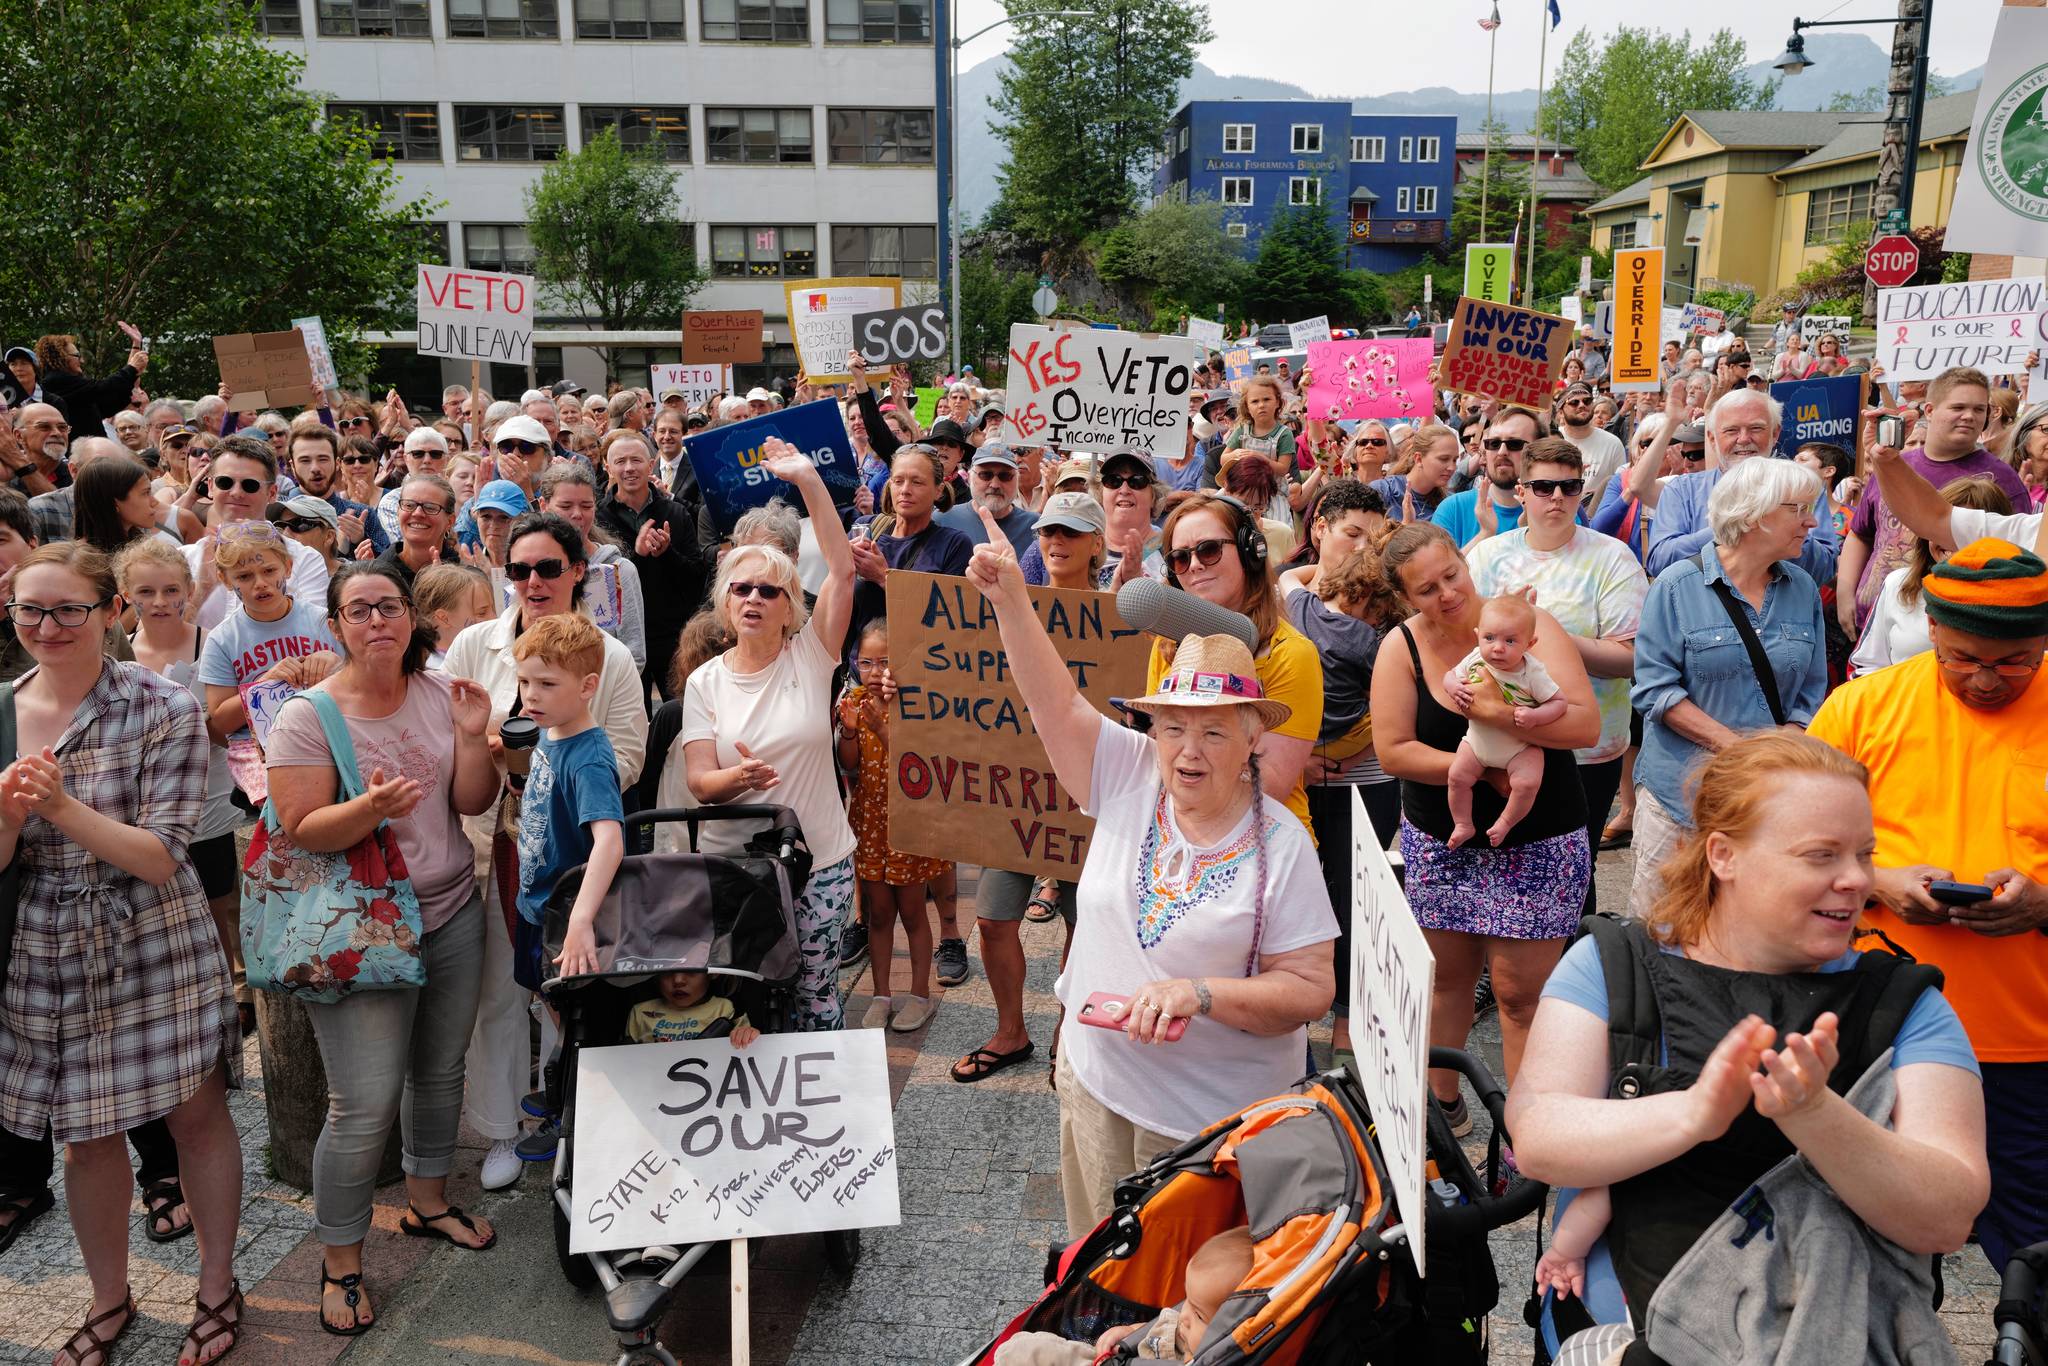 Hundreds of people gather for a rally in front of the Capitol calling for for an override of Gov. Mike Dunleavy’s budget vetoes on Monday, July 8, 2019. (Michael Penn | Juneau Empire)